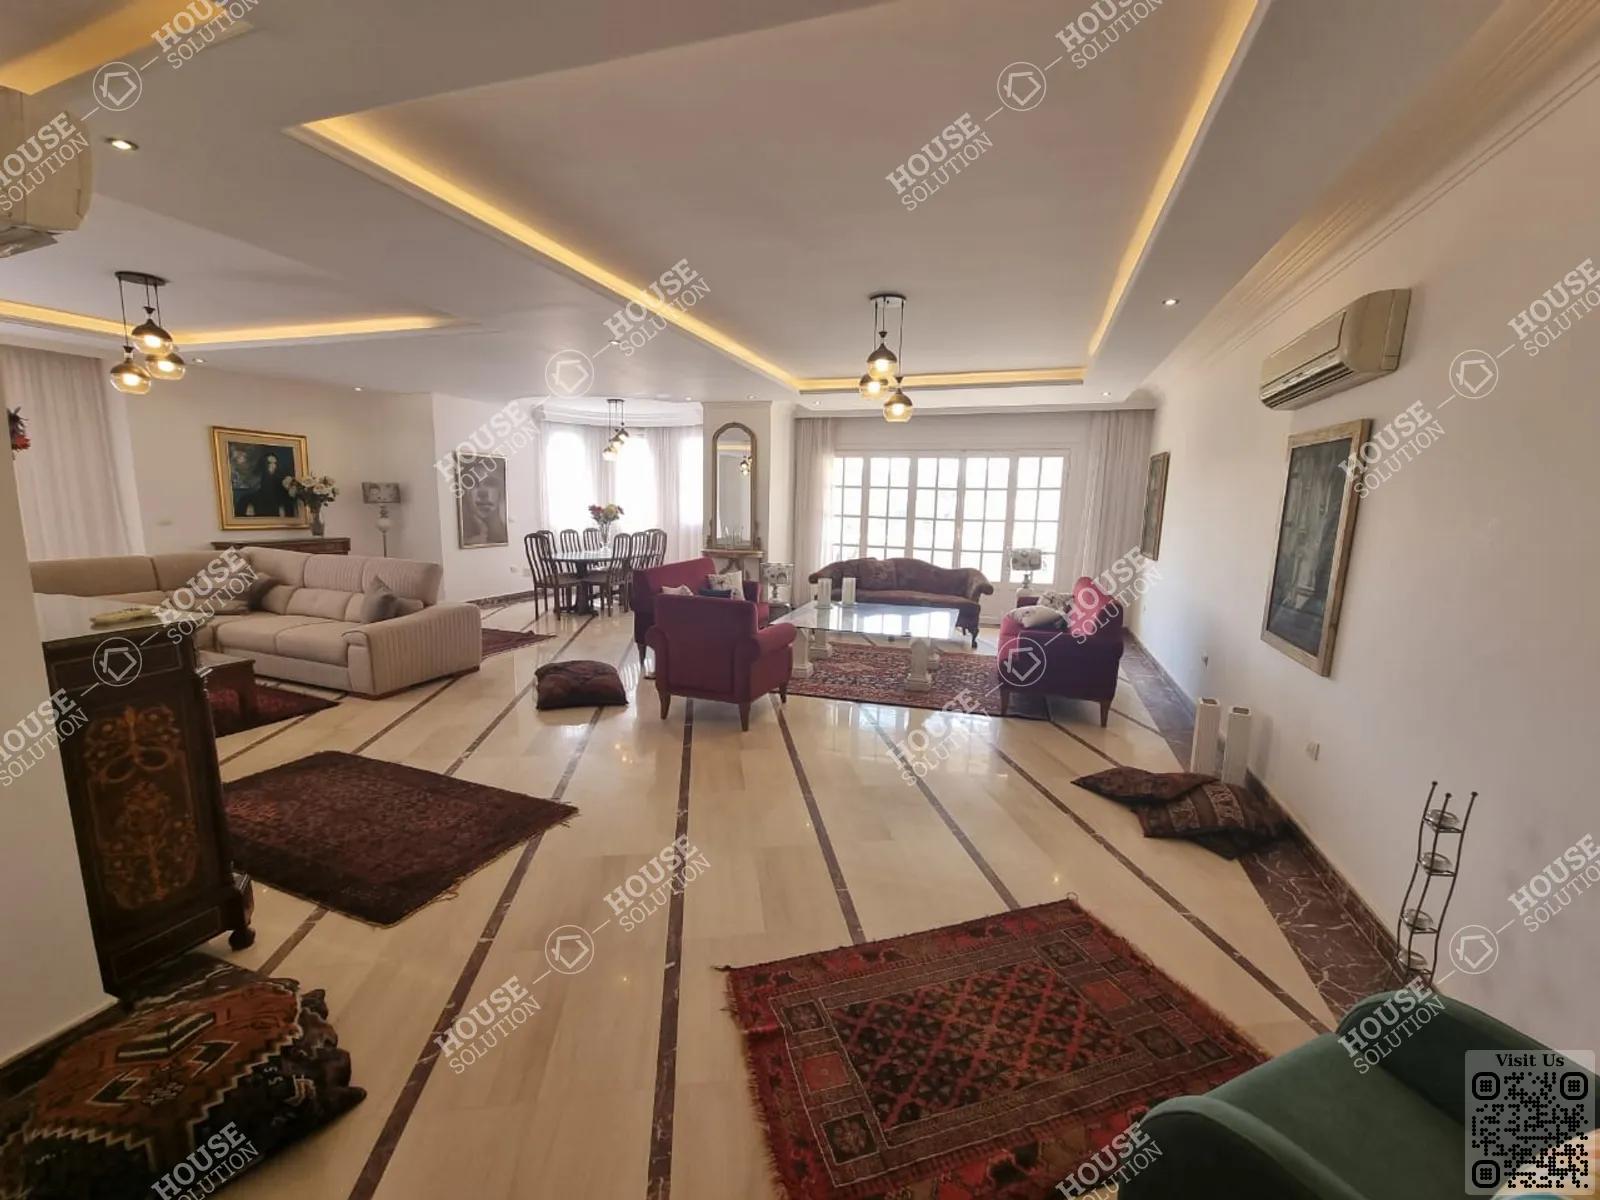 RECEPTION  @ Apartments For Rent In Maadi Maadi Sarayat Area: 300 m² consists of 4 Bedrooms 3 Bathrooms Modern furnished 5 stars #5516-2